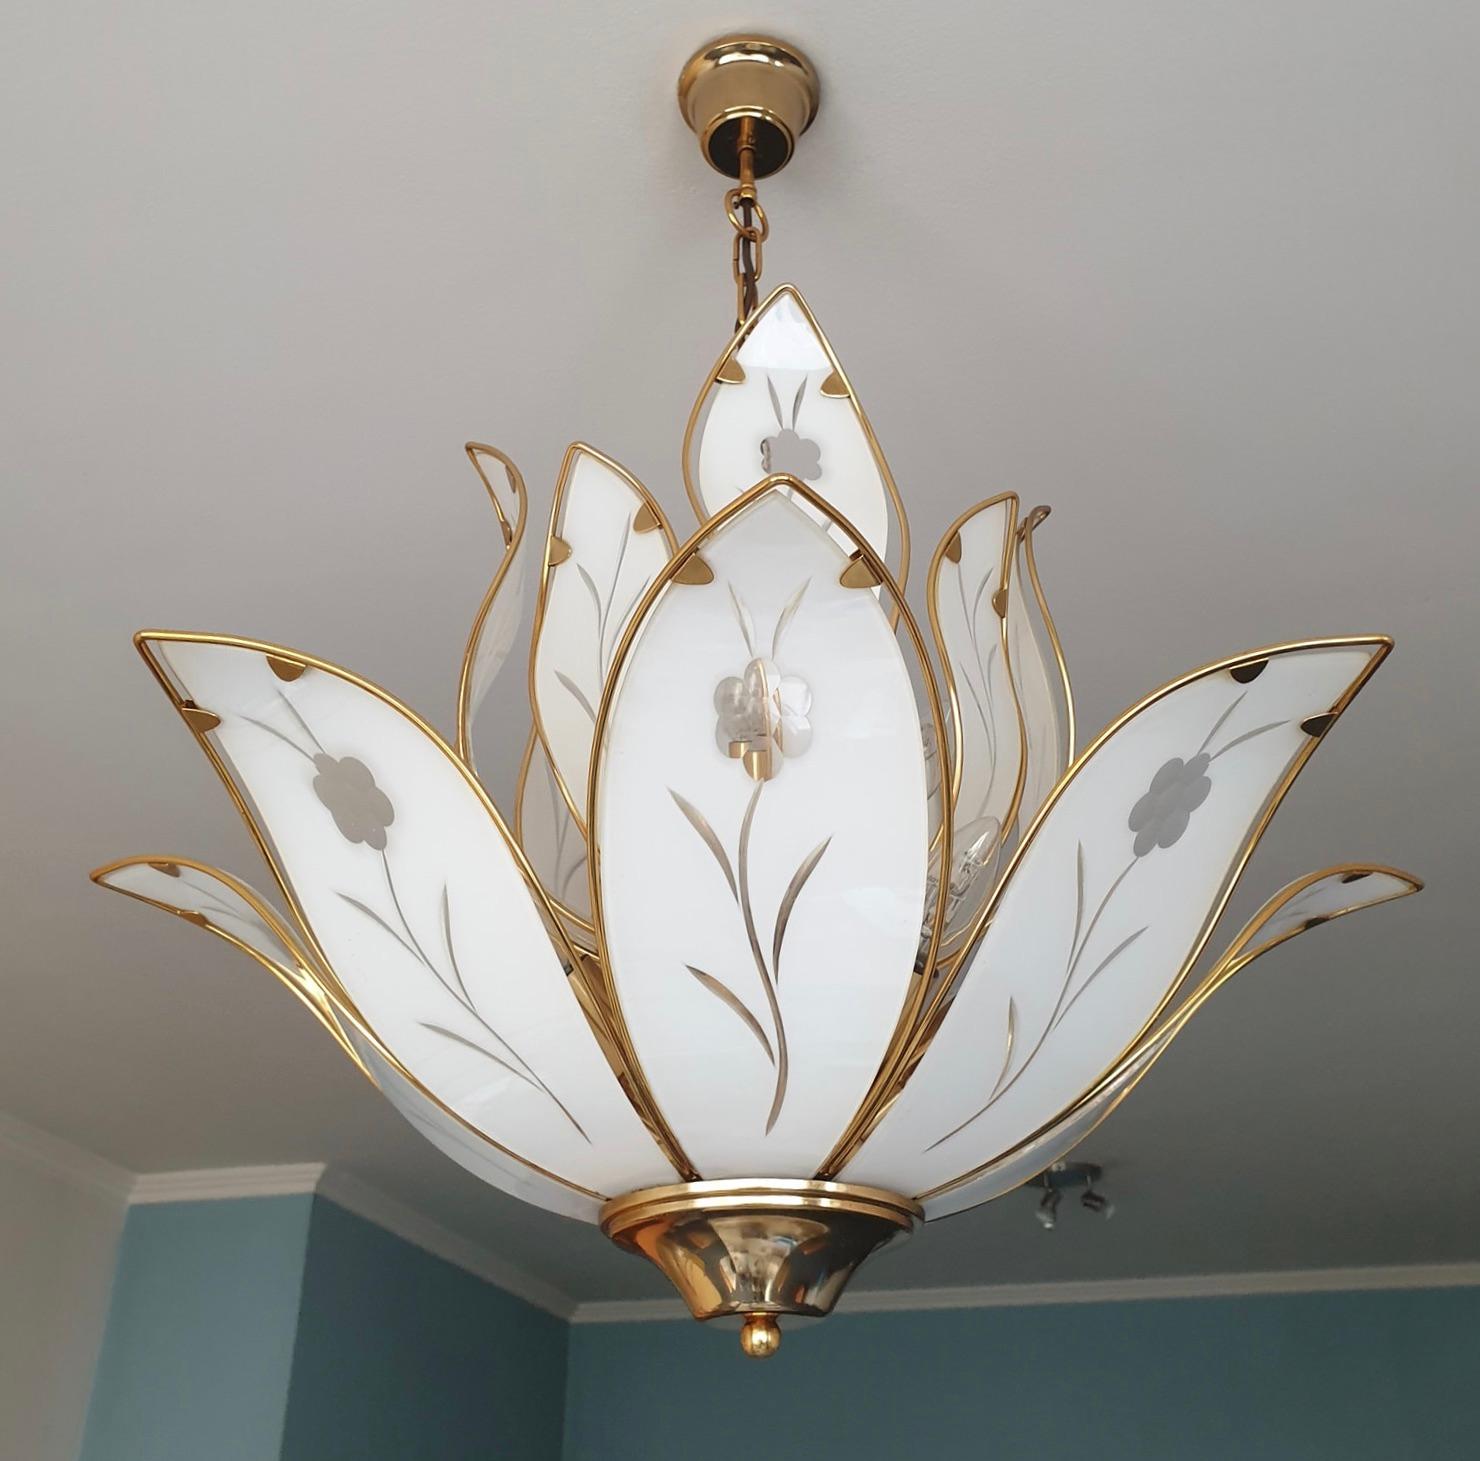 Two Elegant brass Lotus chandelier with white Murano glass leaves in Franco Luce style.
Italy,1970s.

We also have two smaller chandeliers with a diameter of 18.5